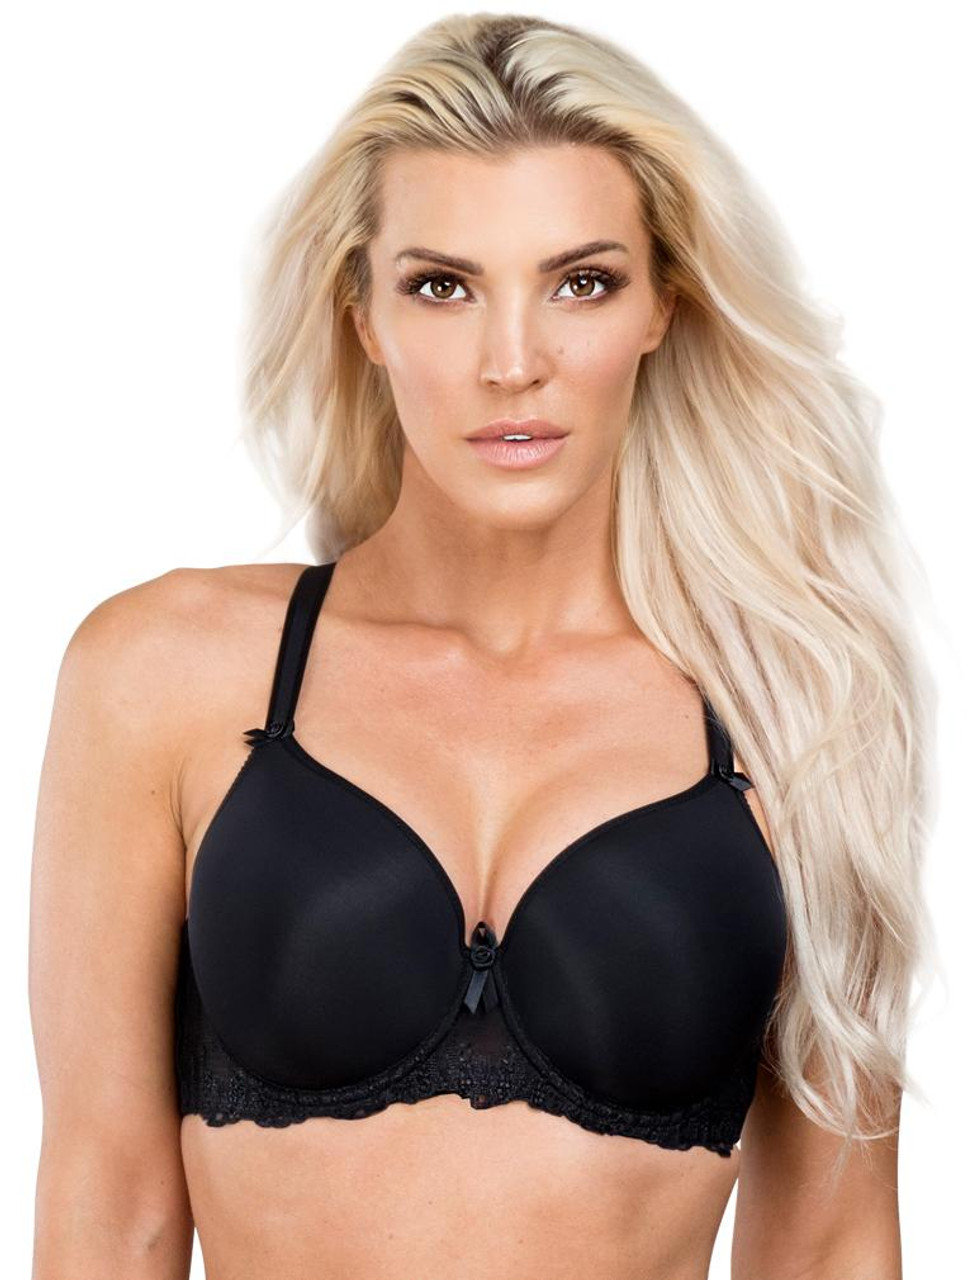 Fit Fully Yours Elise T-Shirt Bra in Black FINAL SALE (50% Off) - Busted  Bra Shop